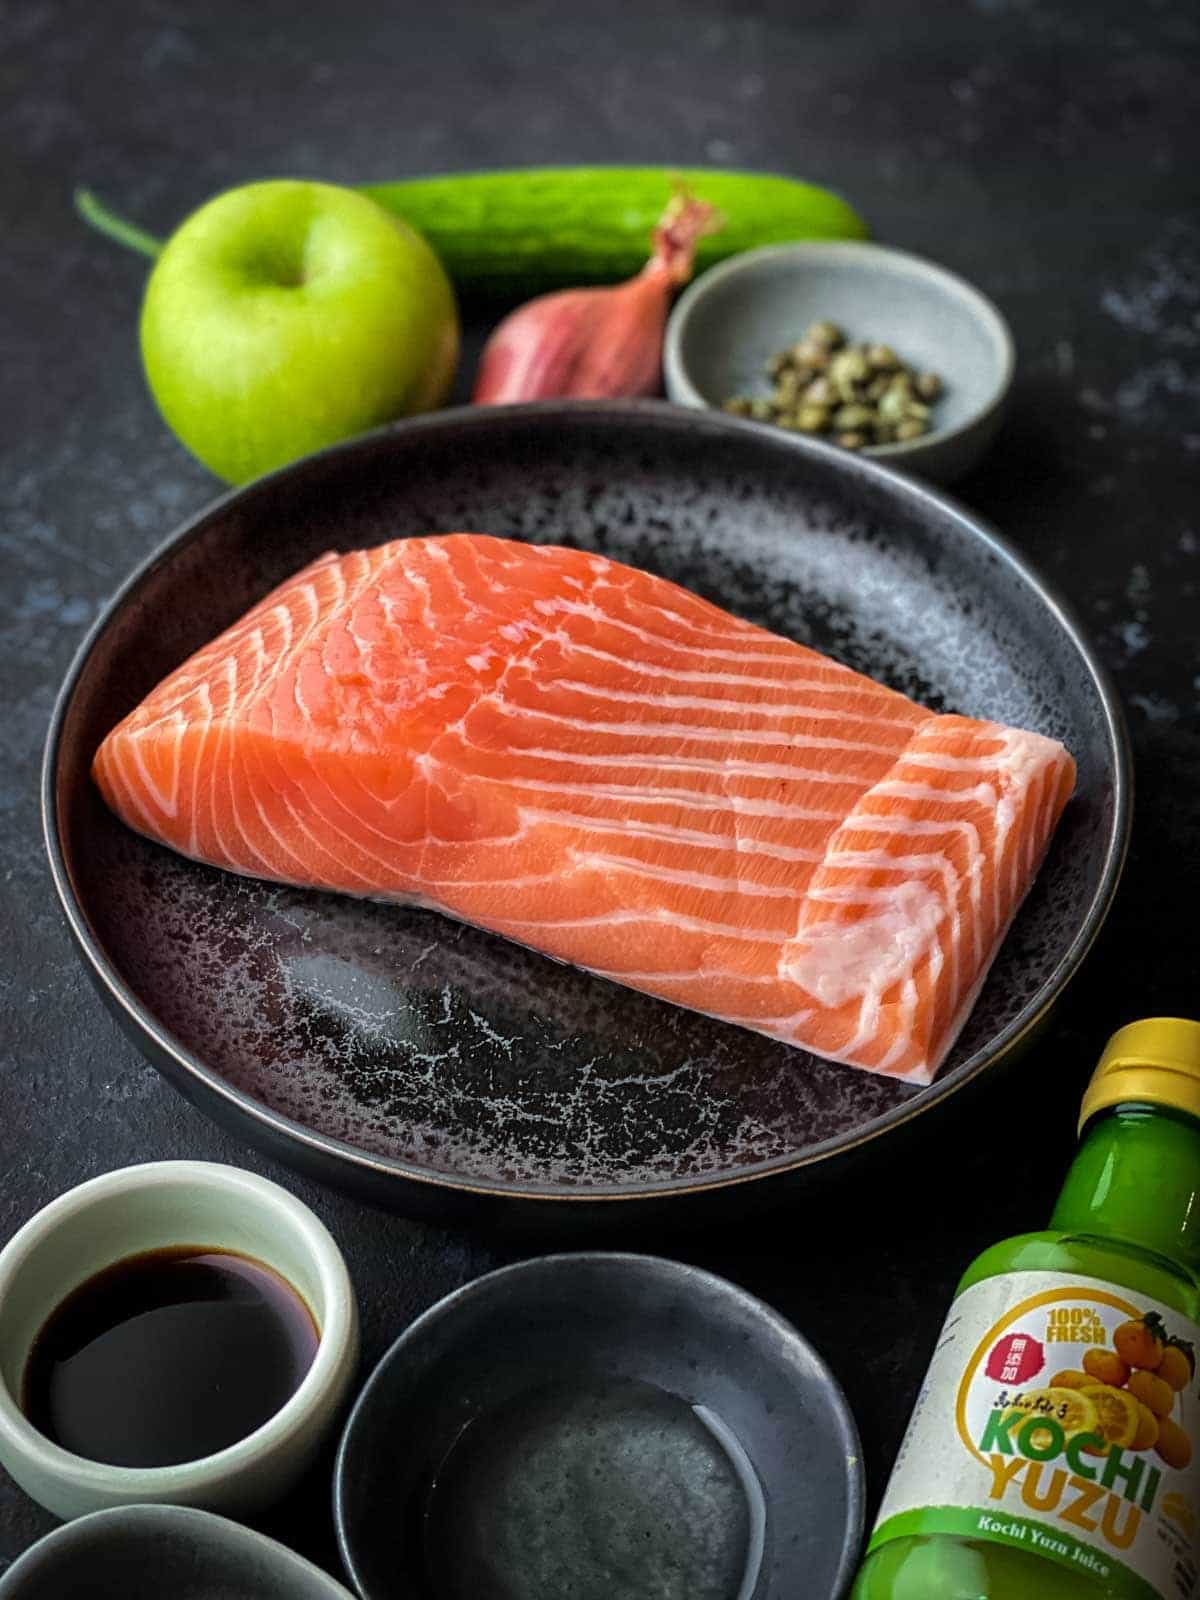 Raw sashimi grade salmon on a black speckled plate surrounded by the rest of the ingredients of the recipe